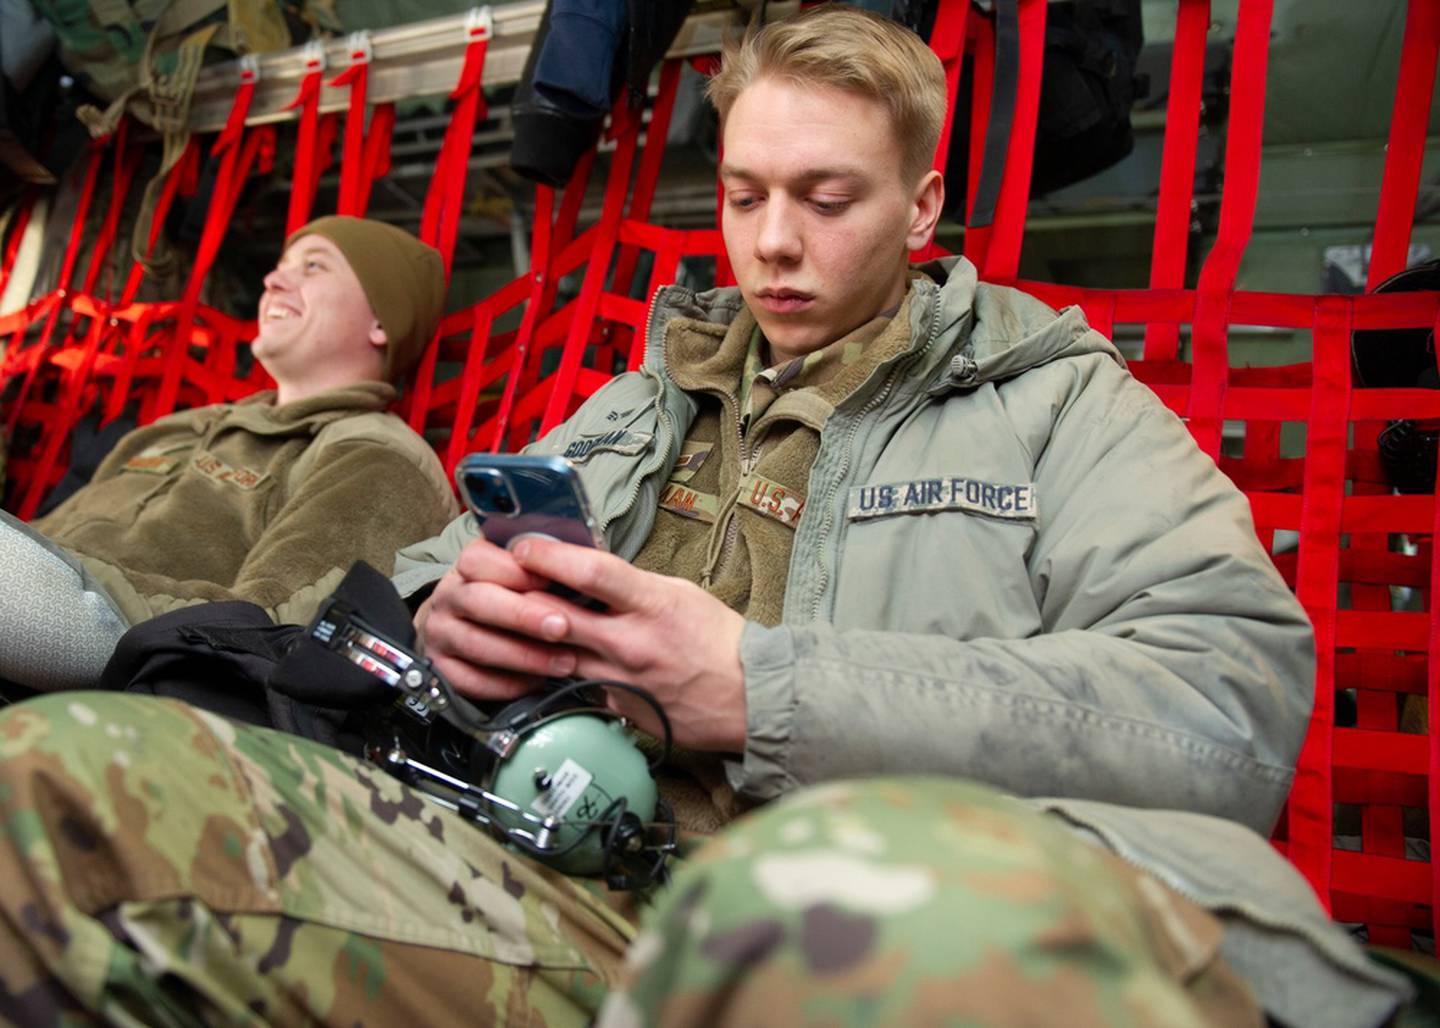 Senior Airman Josiah Goodman, 934th Maintenance Squadron aerospace propulsion technician, texts his girlfriend “goodbye” as he waits for his C-130 to take off at Minneapolis-St. Paul Air Reserve Station on Feb. 16, 2022. Airmen from the wing are deploying in support of a broader effort to demonstrate our commitment to our NATO allies. (Chris Farley/Air Force)